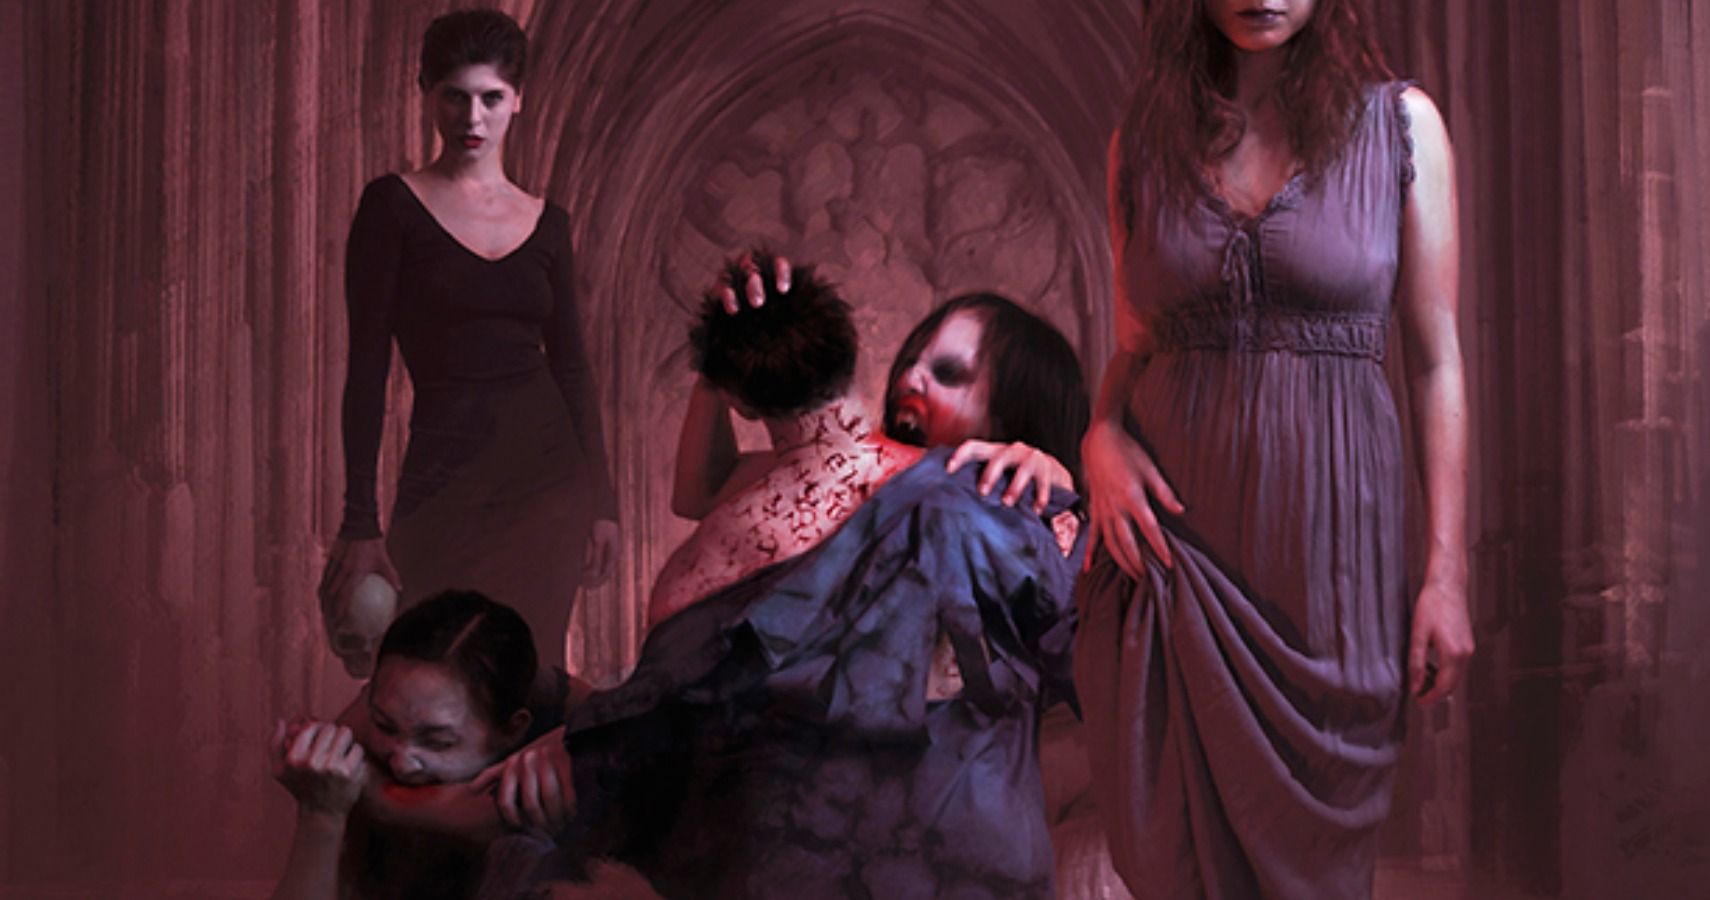 Vampire: The Masquerade - Coteries of New York's Disciplines Explained